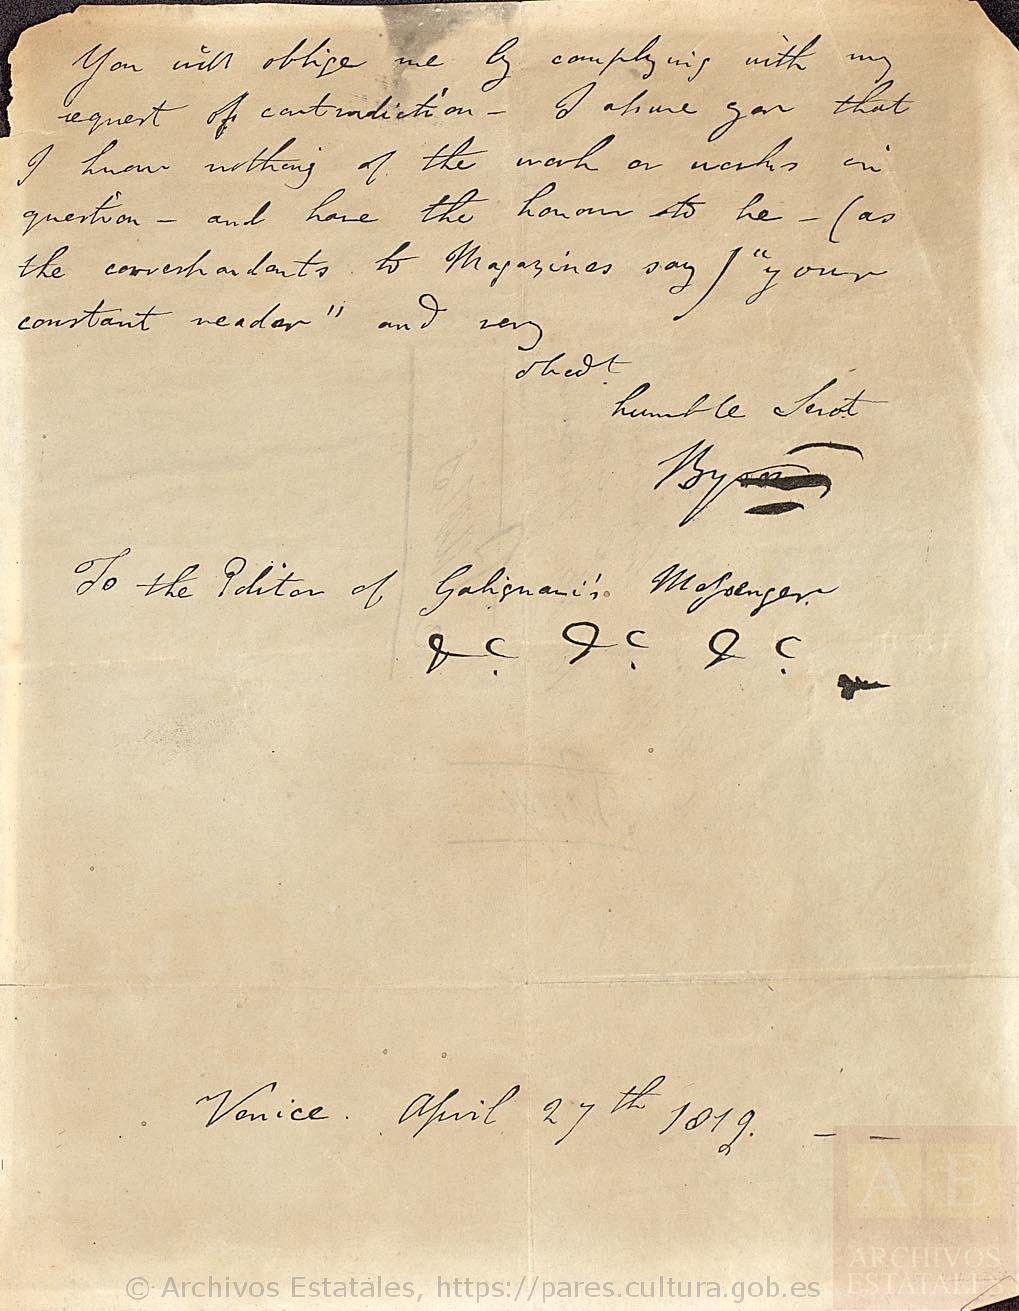 Archivo Histórico Nacional, Letter to Mr Galignani signed by Lord Byron, 1819, available here